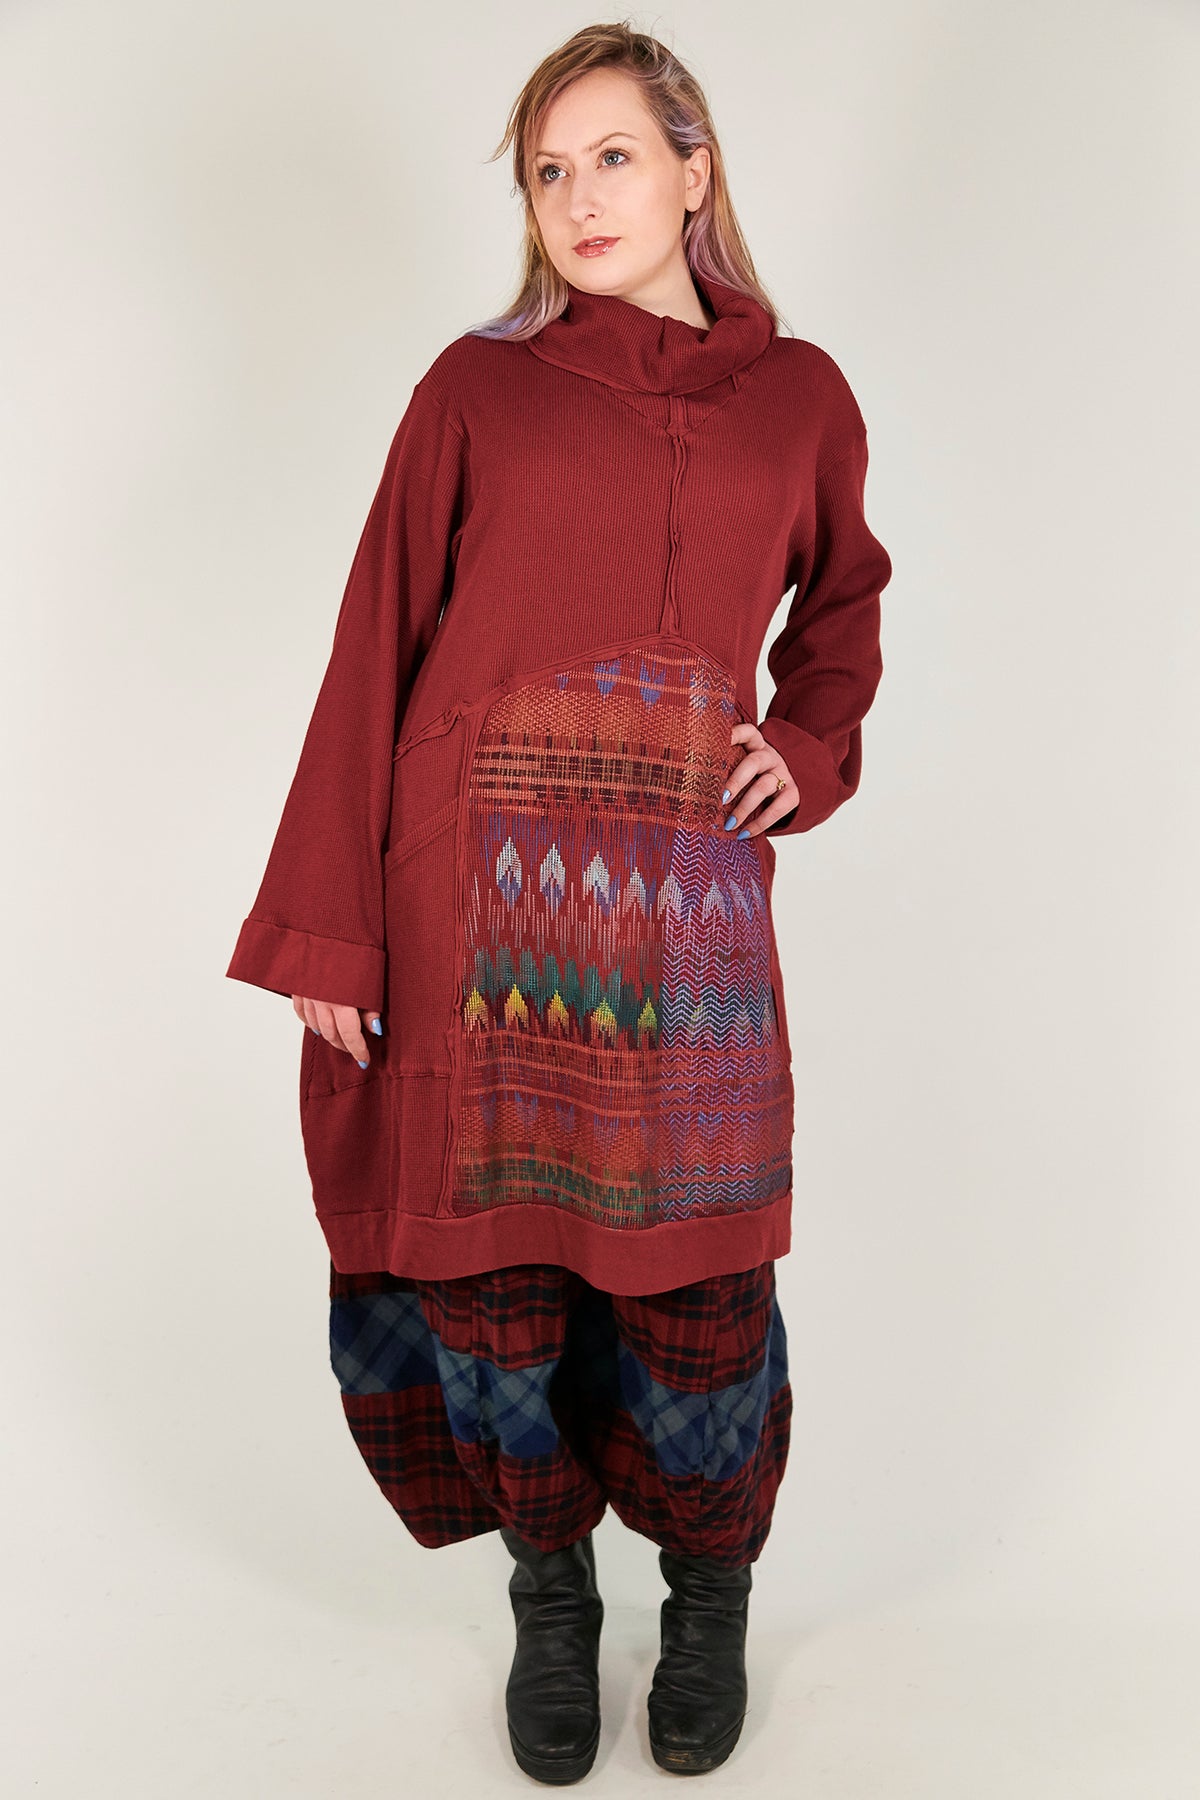 2207 Thermal Travel All Roads Tunic-Sangria-P